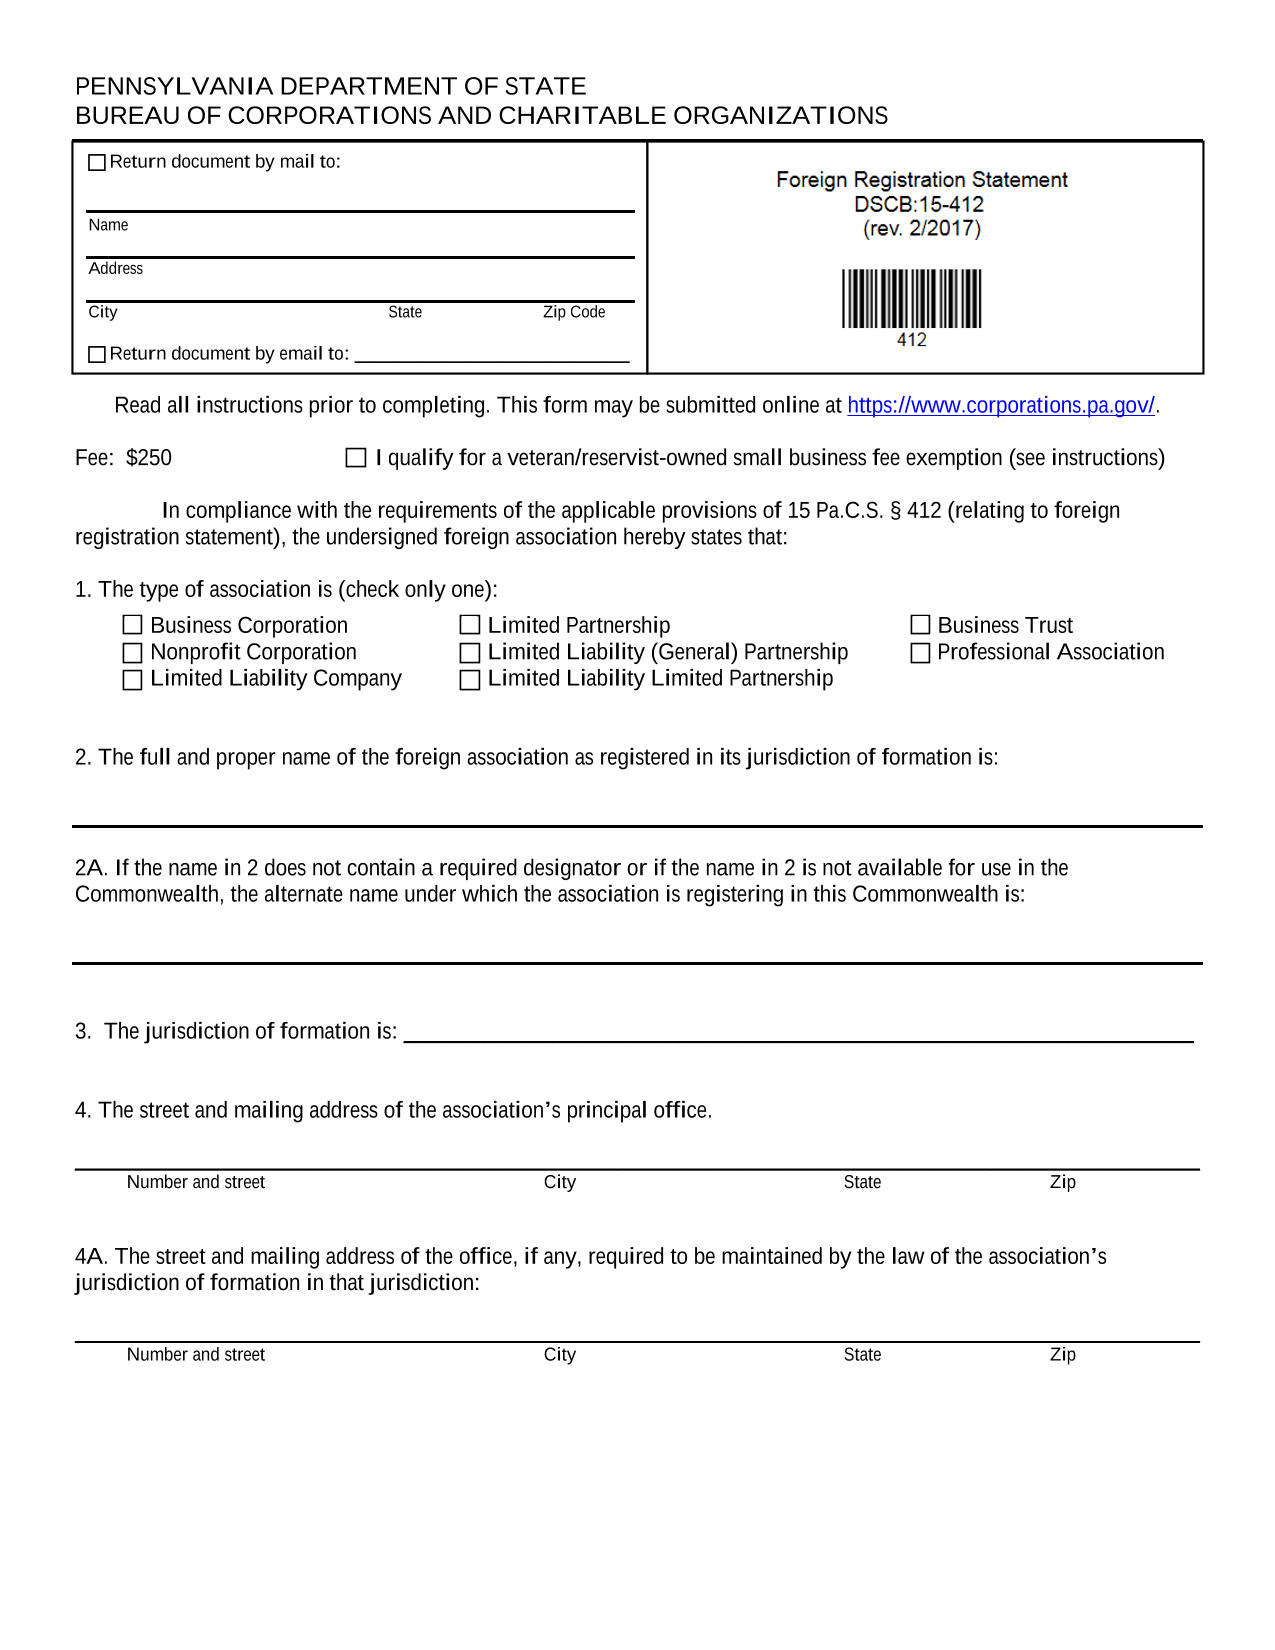 pennsylvania-foreign-corporation-application-for-certificate-of-authority